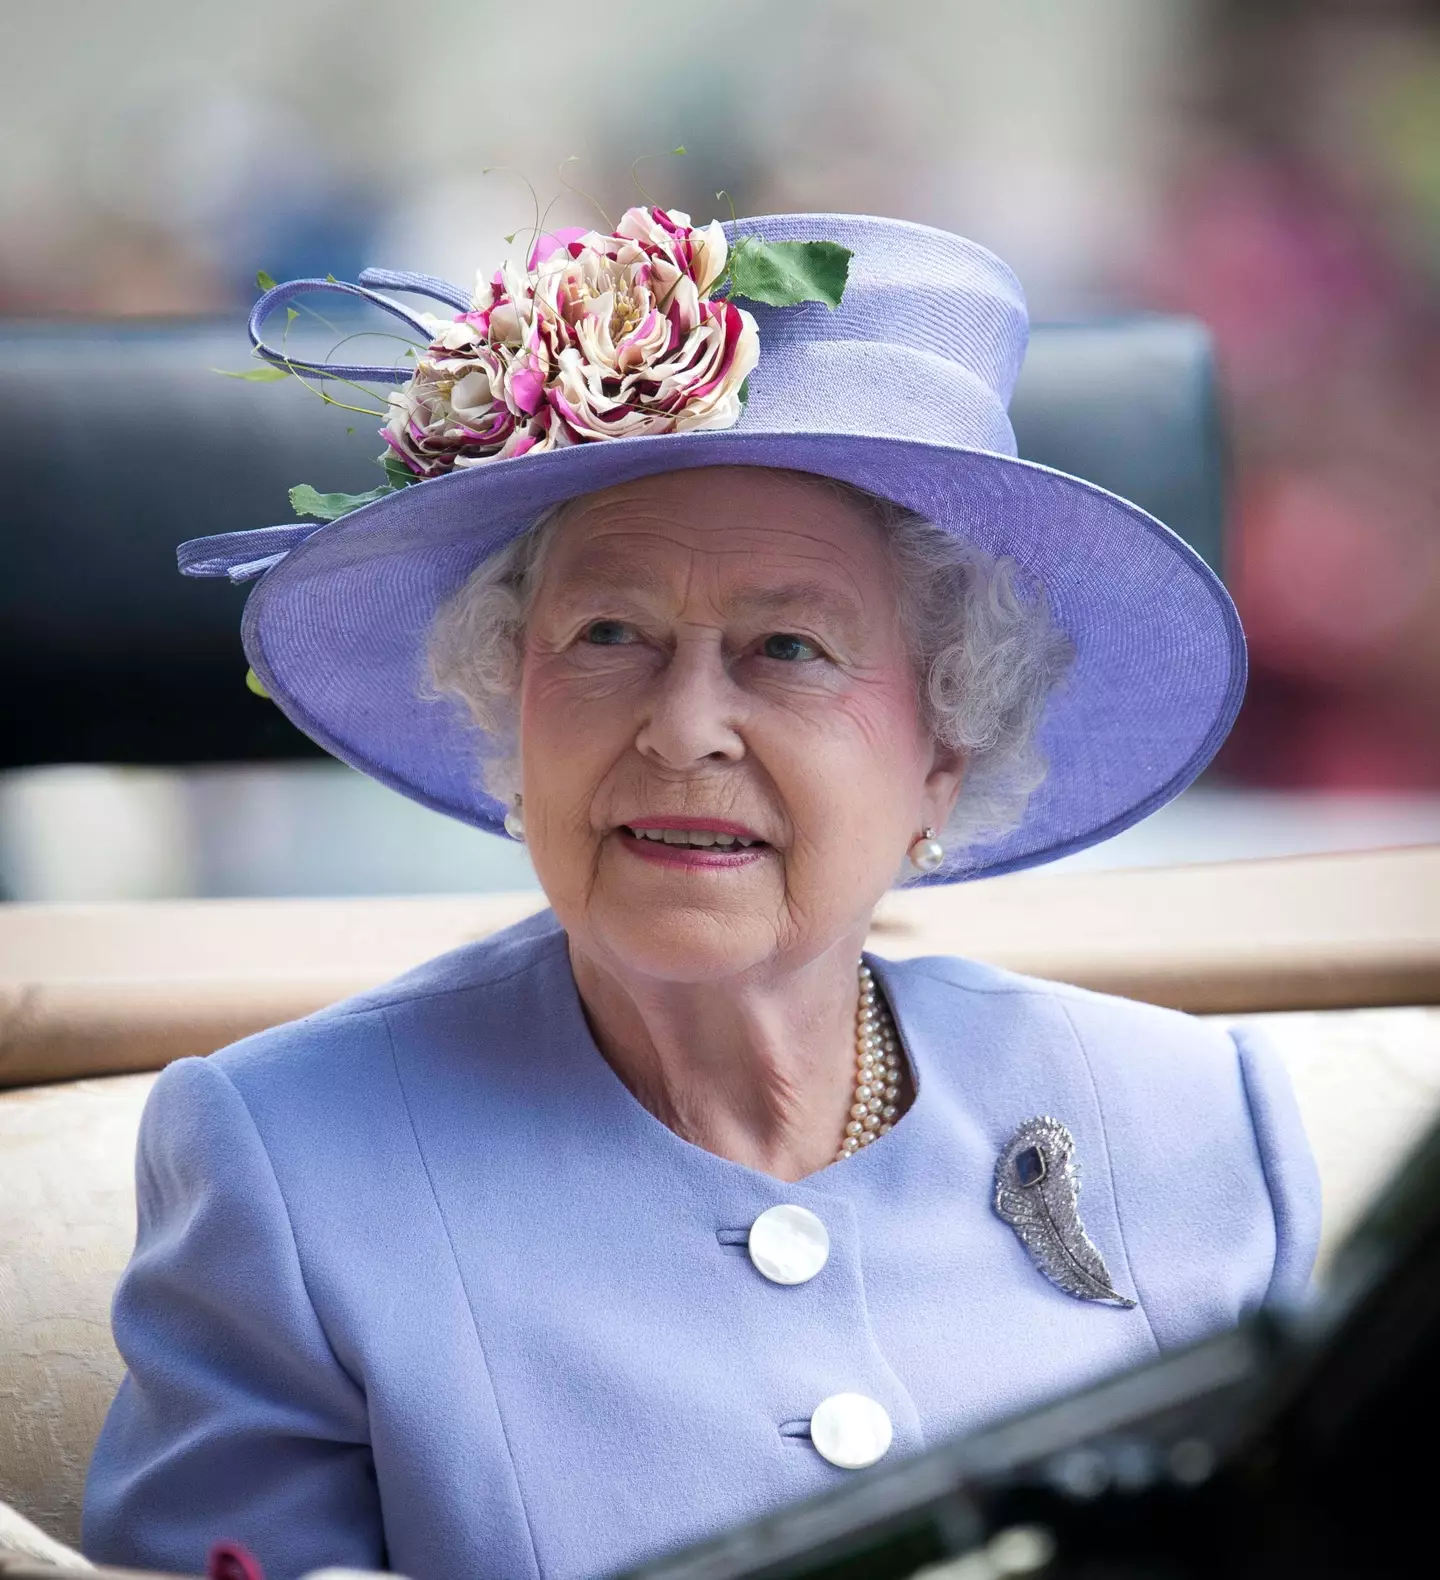 Queen Elizabeth II died yesterday (8 September) surrounded by her family at Balmoral Castle in Scotland.